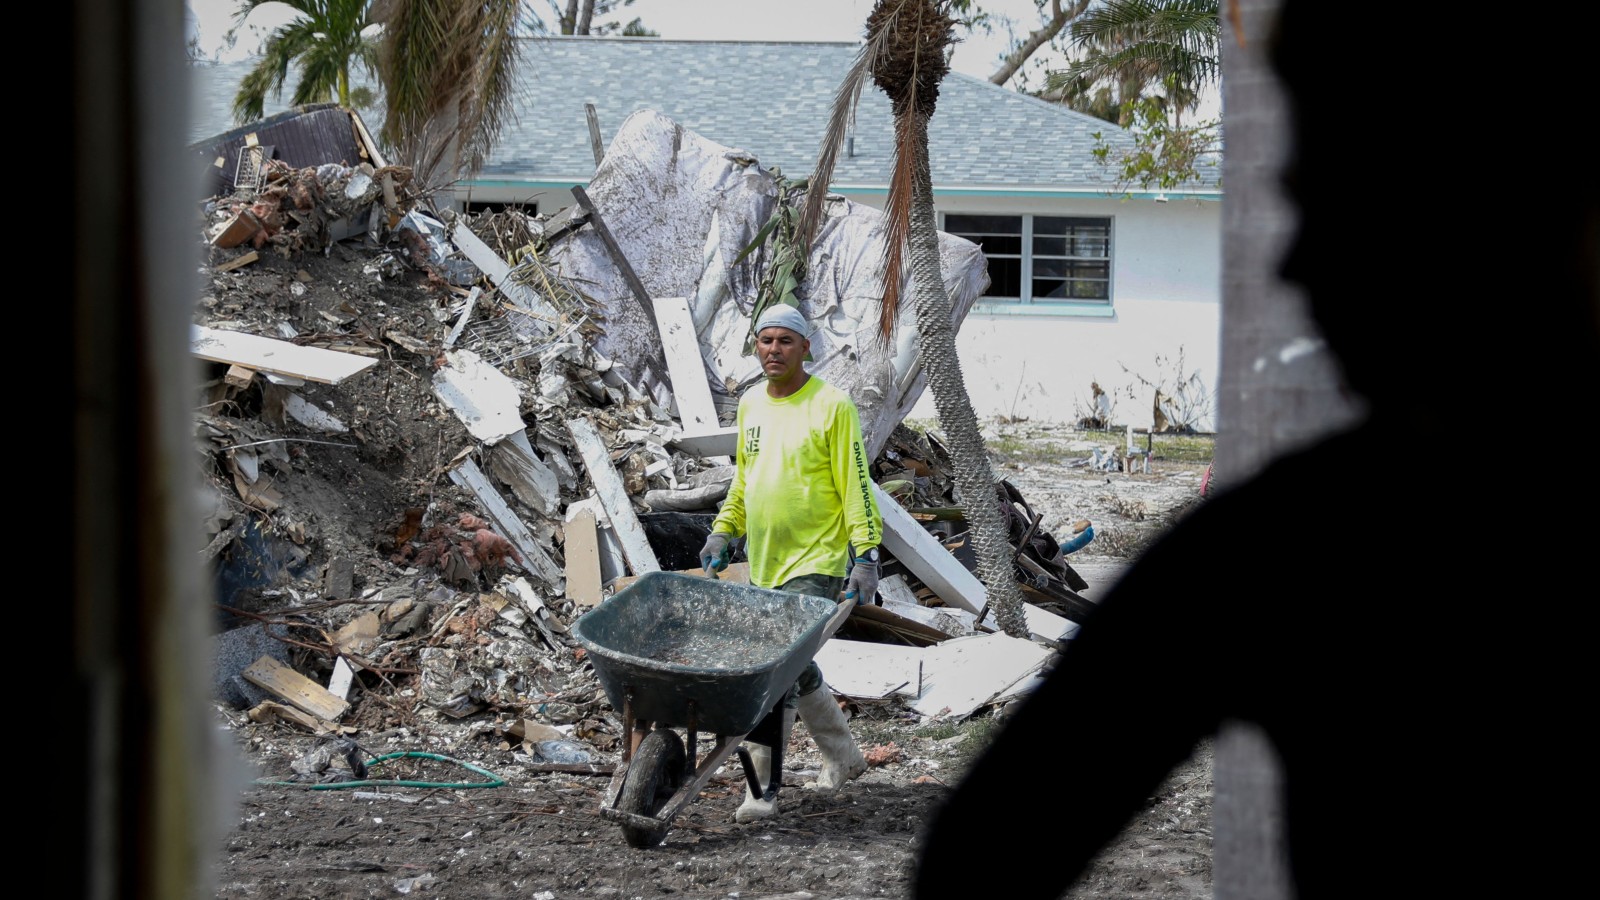 A man in a yellow shirt pushes a wheelbarrow amid mounds of debris as another man watches on.